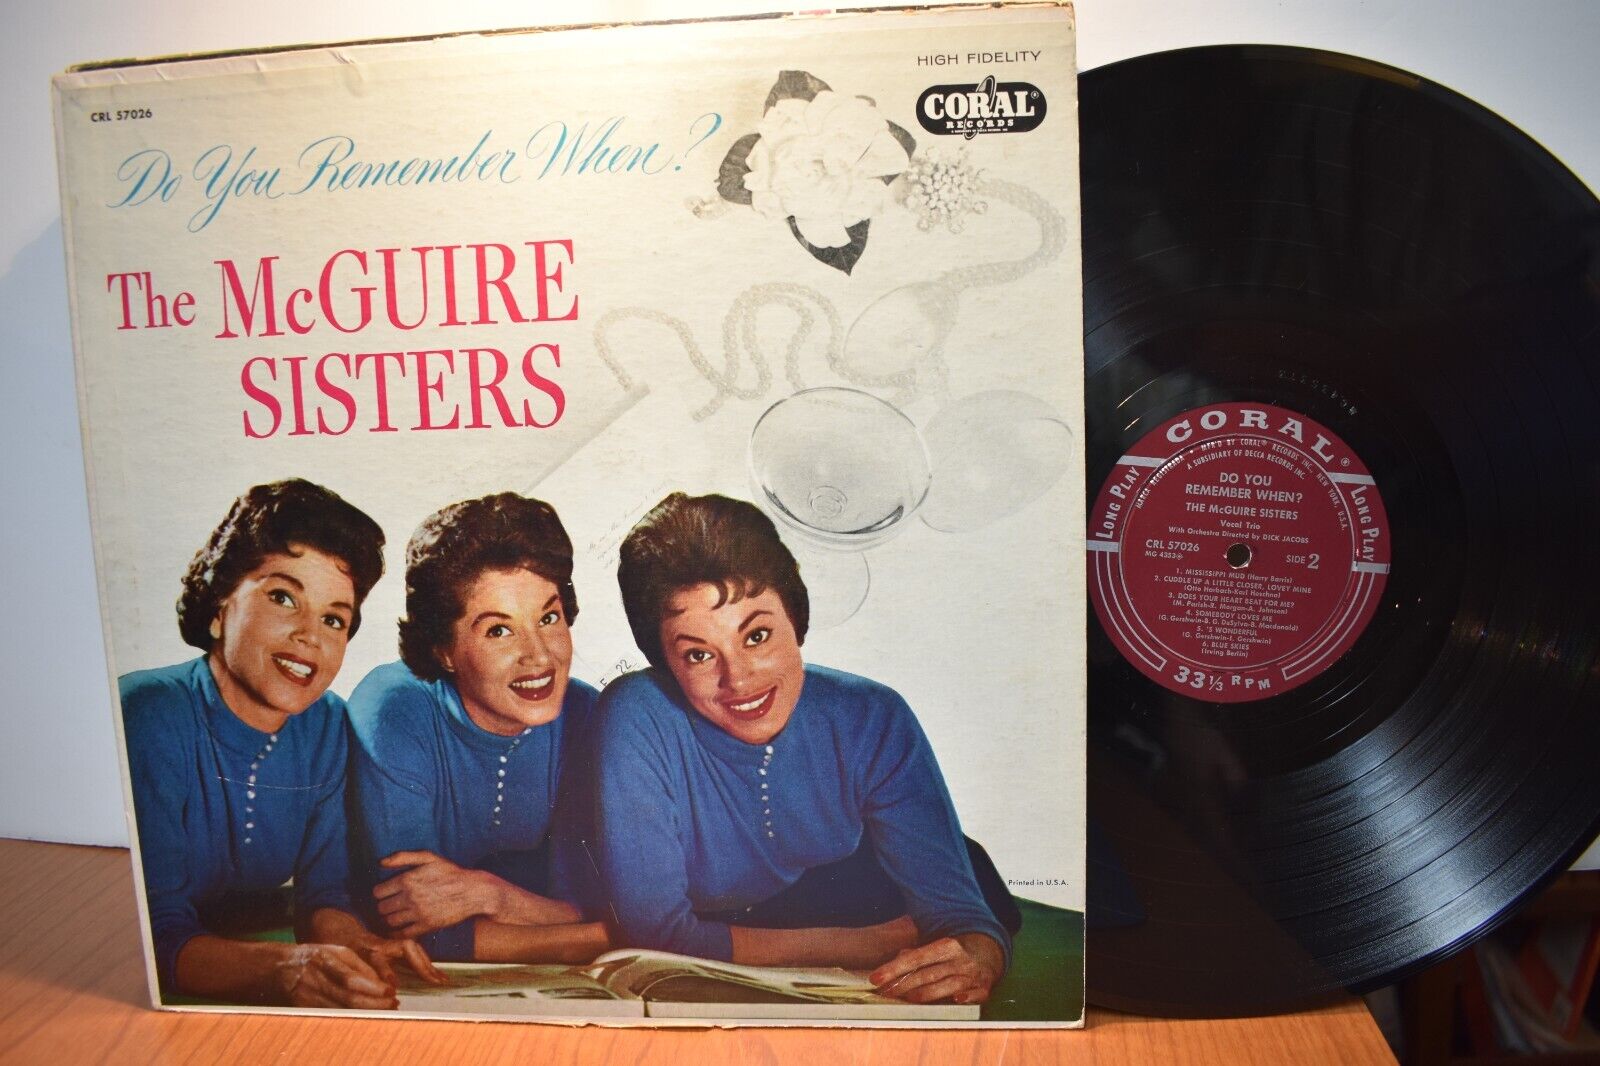 McGuire Sisters Do You Remember When? LP Coral CRL 57026 Mono